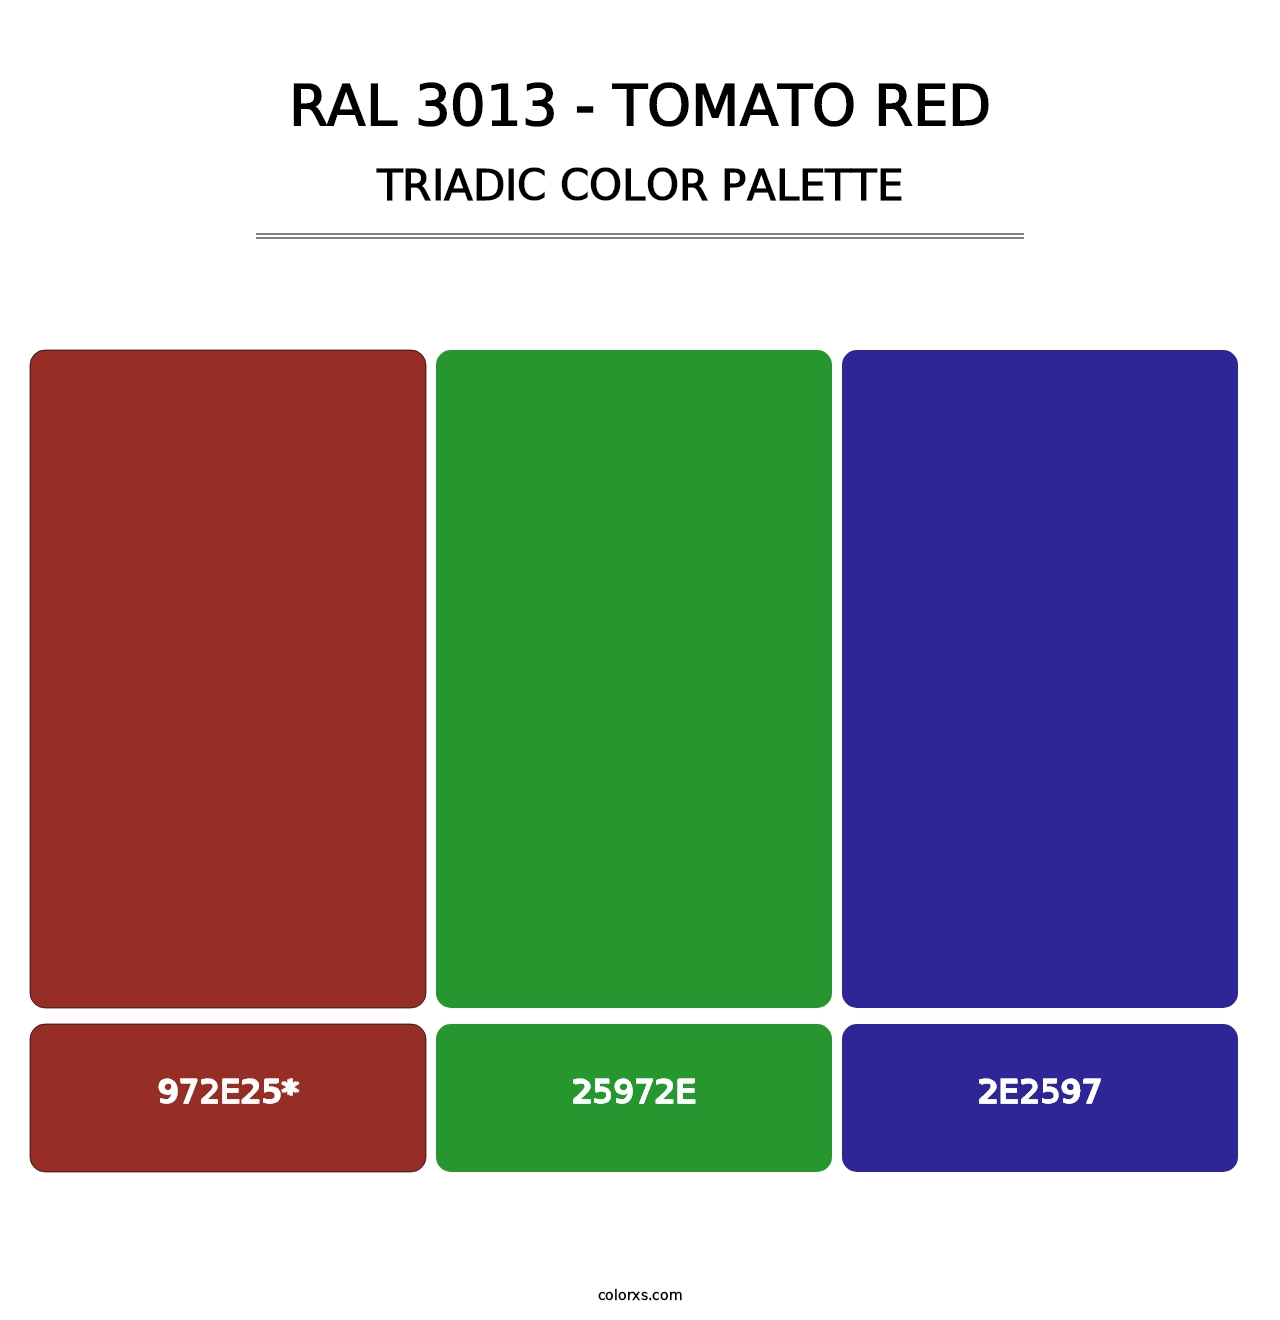 RAL 3013 - Tomato Red - Triadic Color Palette